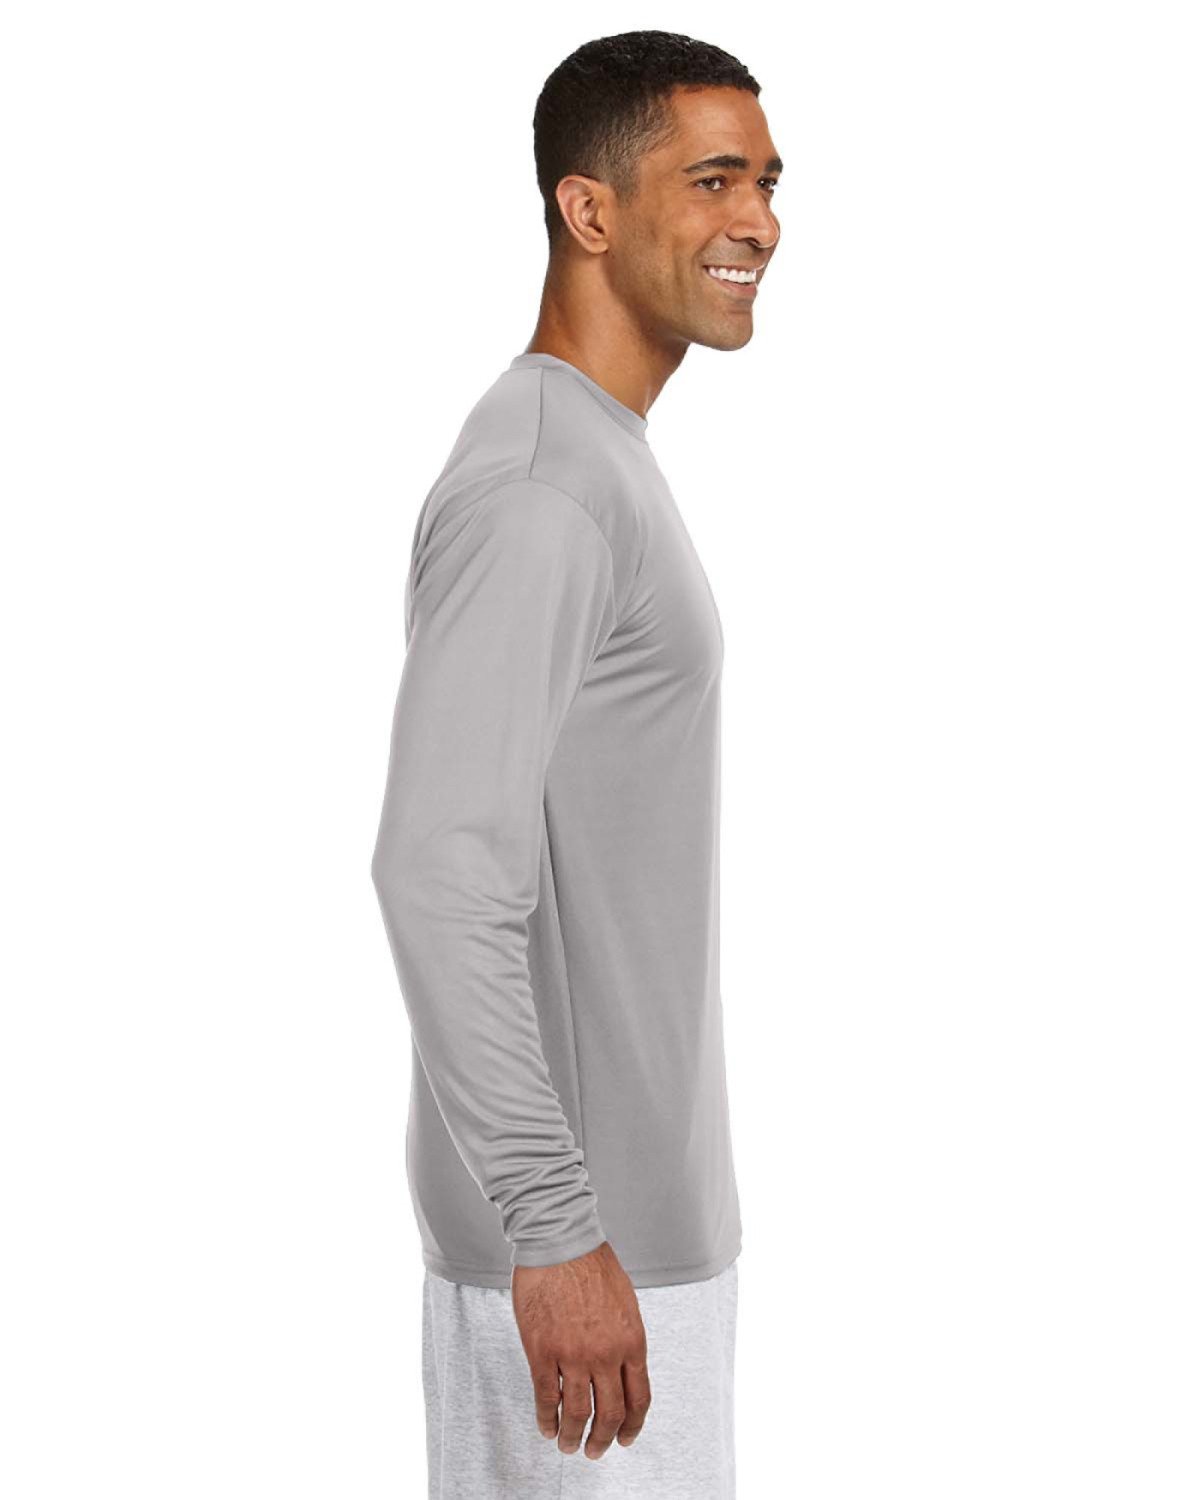 A4 Men's Cooling Performance Long Sleeve T-Shirt | Generic Site - Priced